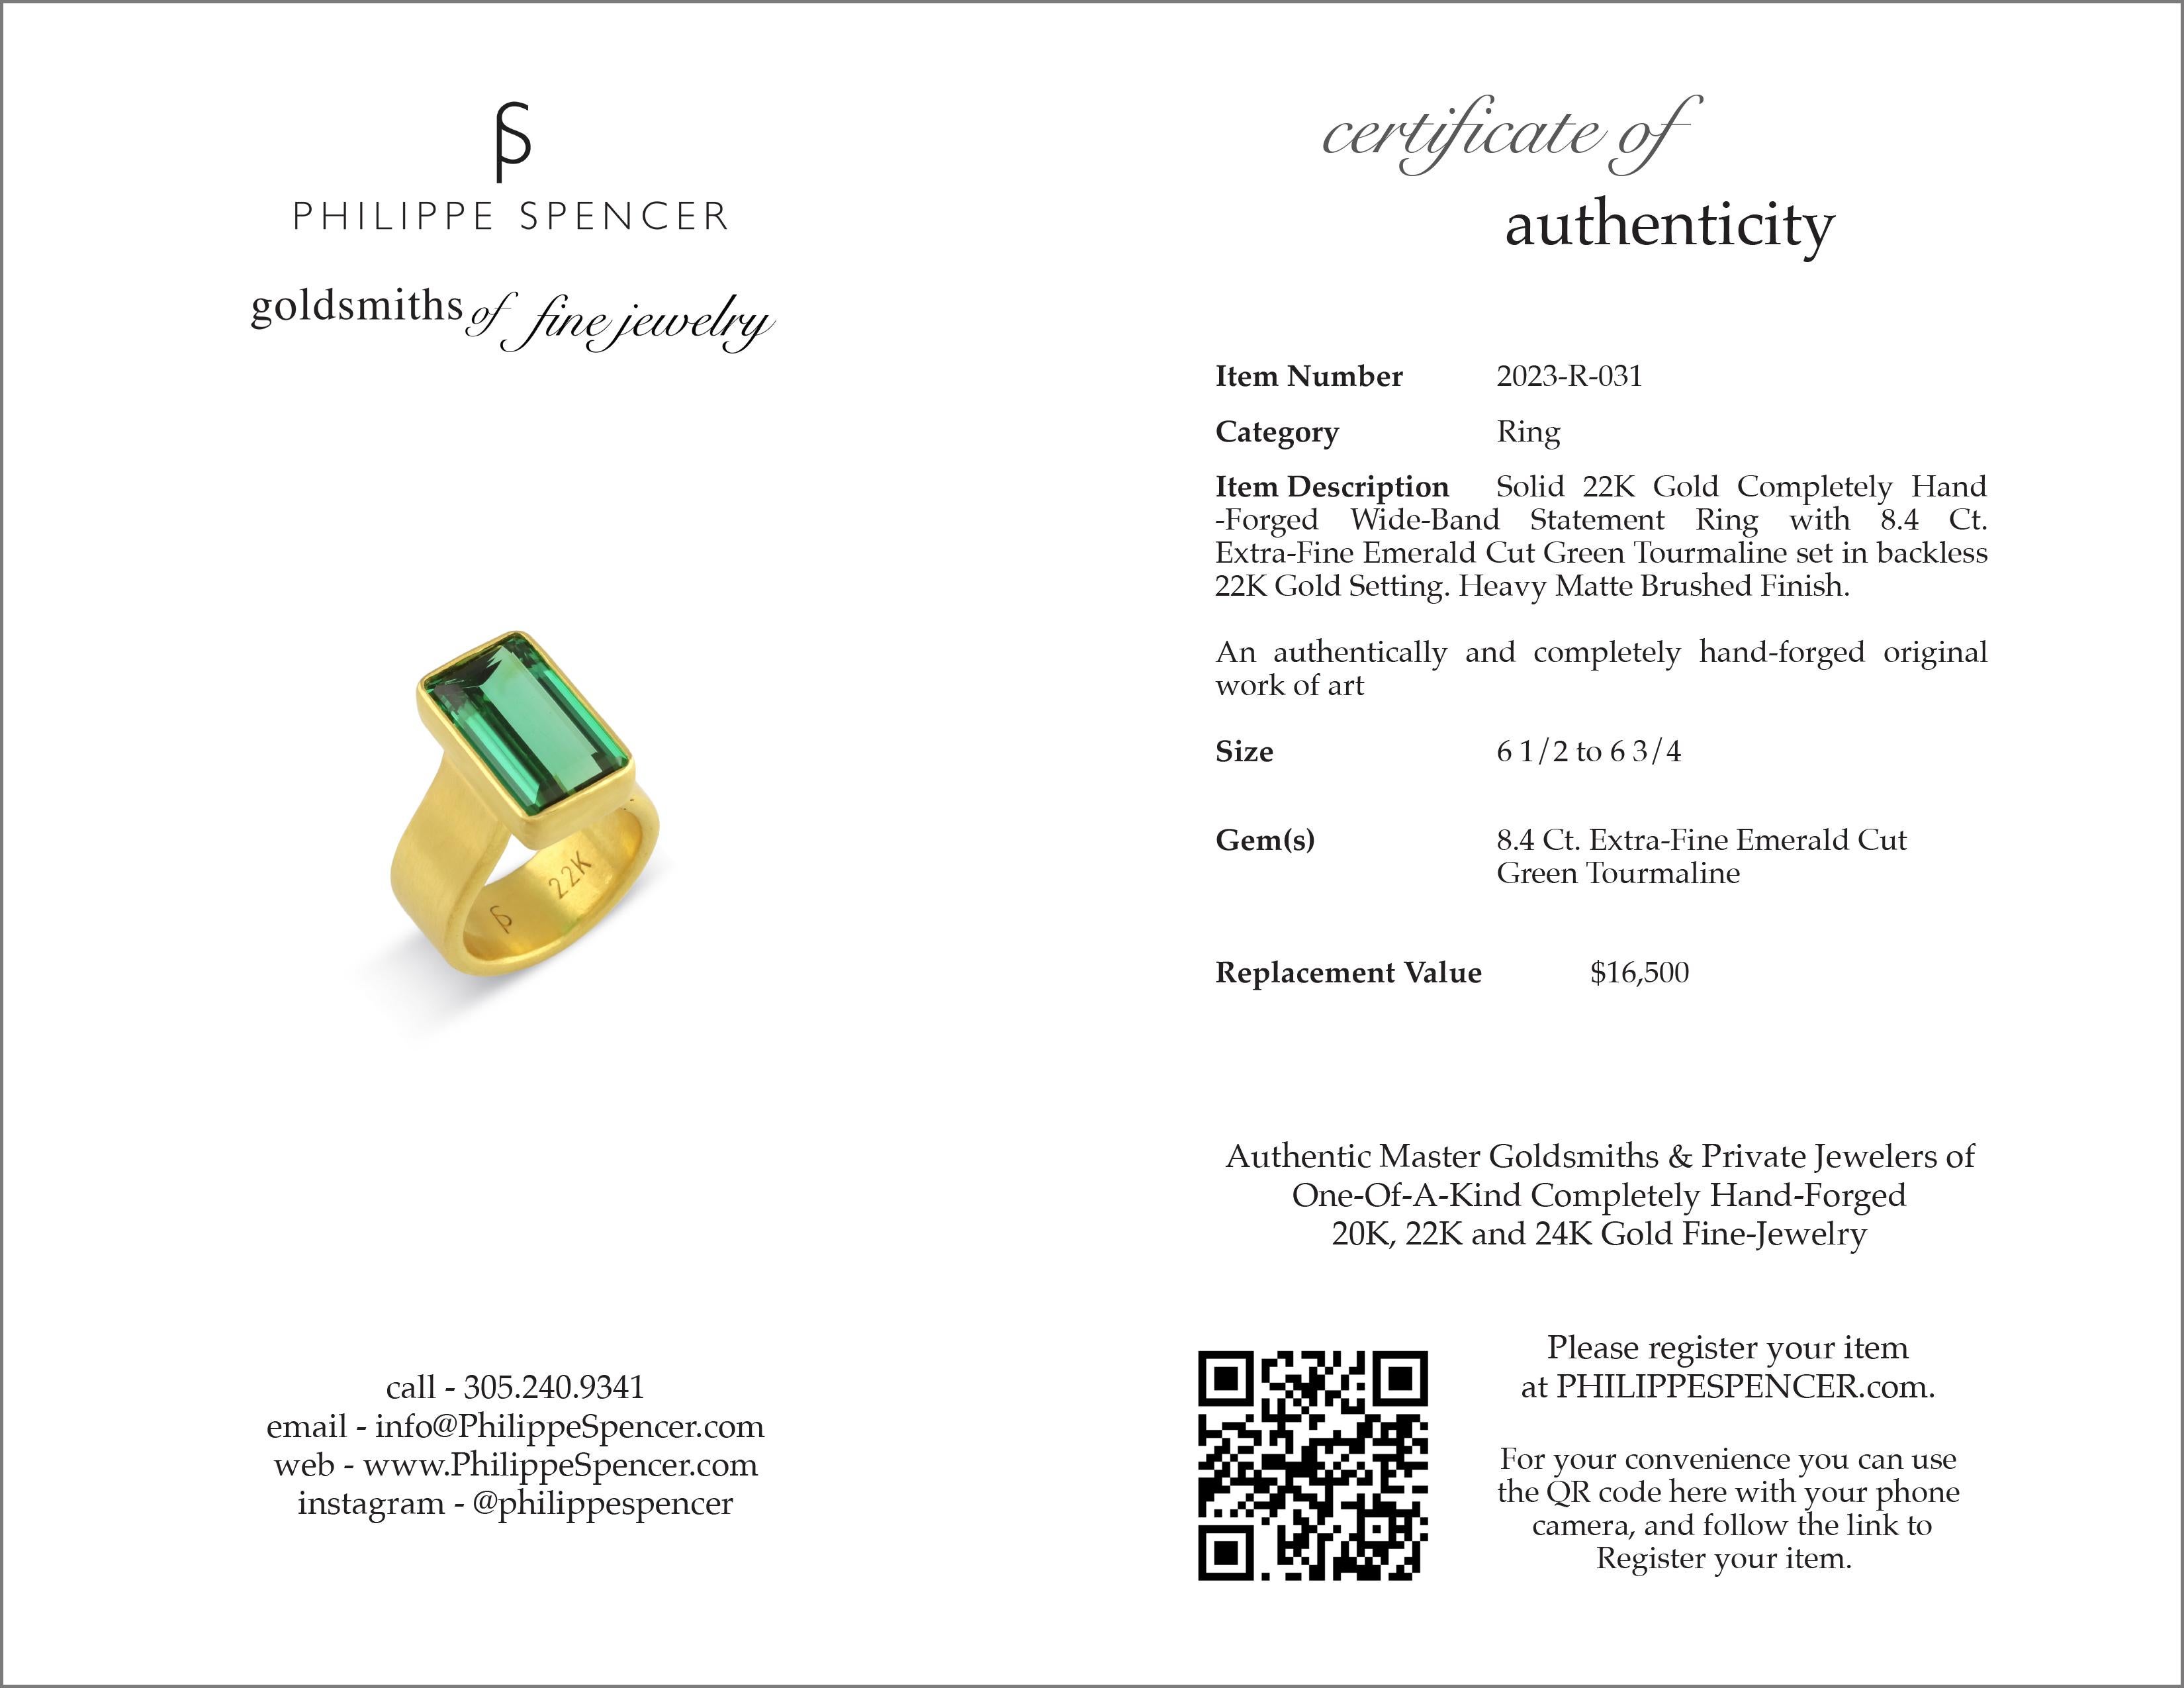 Women's PHILIPPE SPENCER 8.4 Ct. Extra-Fine Tourmaline Statement Ring in 22K Gold For Sale